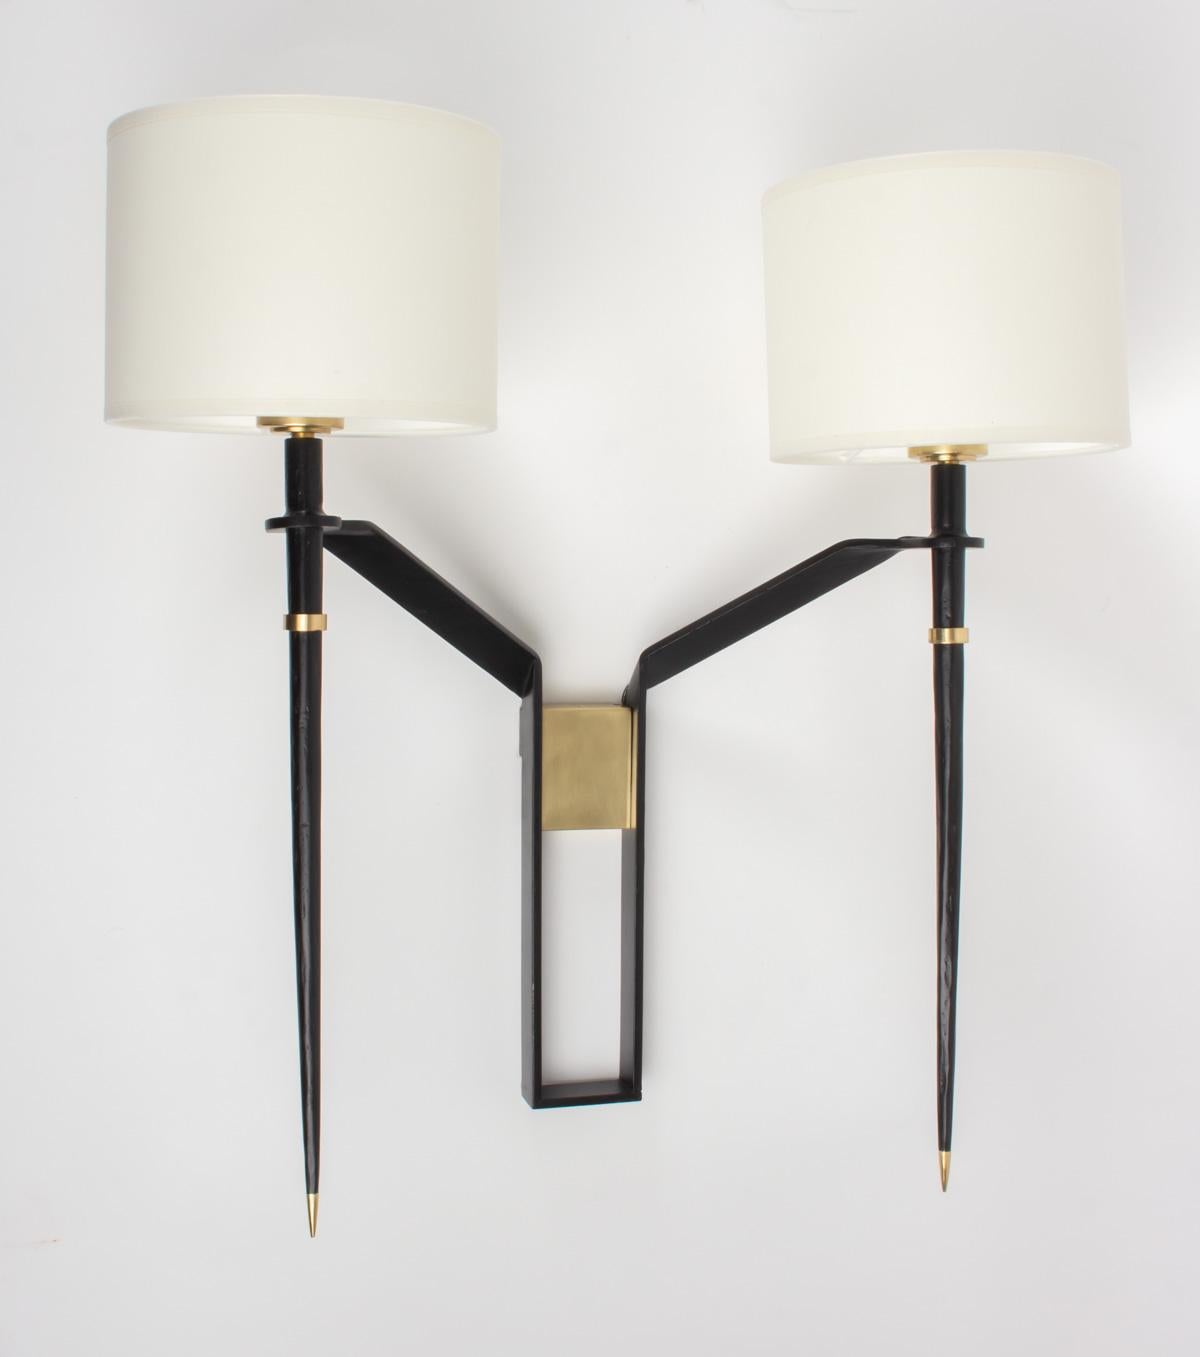 Elegant pair of Maison Honore sconces, French editions, 1960s.
Made of black lacquered wrought iron adorned with brass pieces.
Handmade off-white cylindrical cotton shades.
Two bulbs per sconce.
  